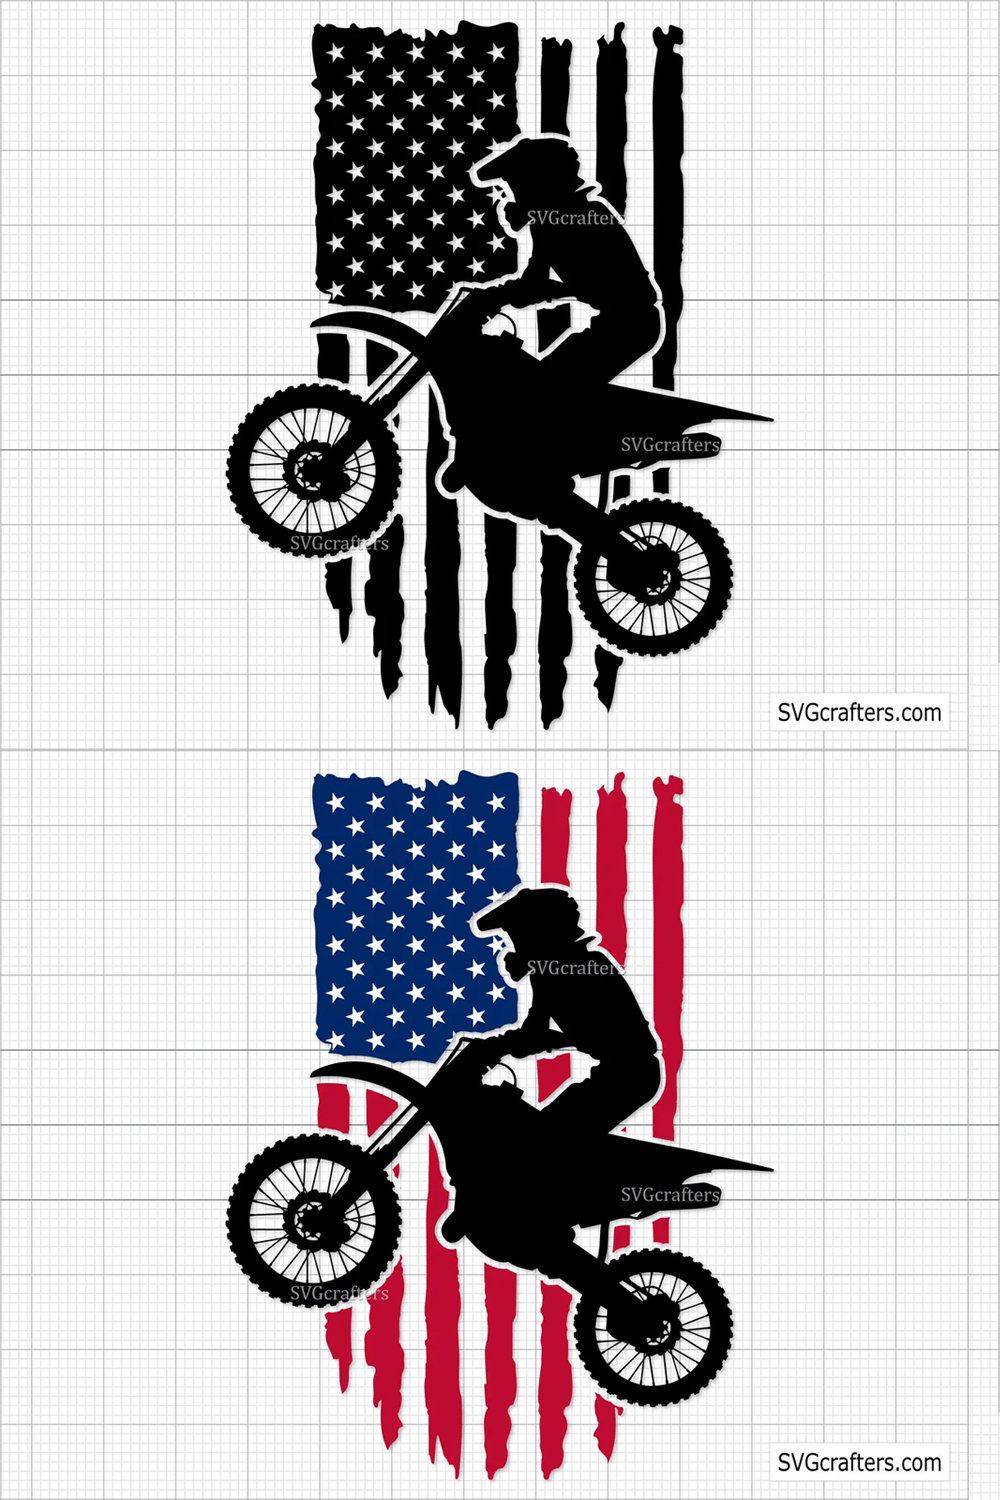 A preview of prints with a motorcyclist with an American flag.